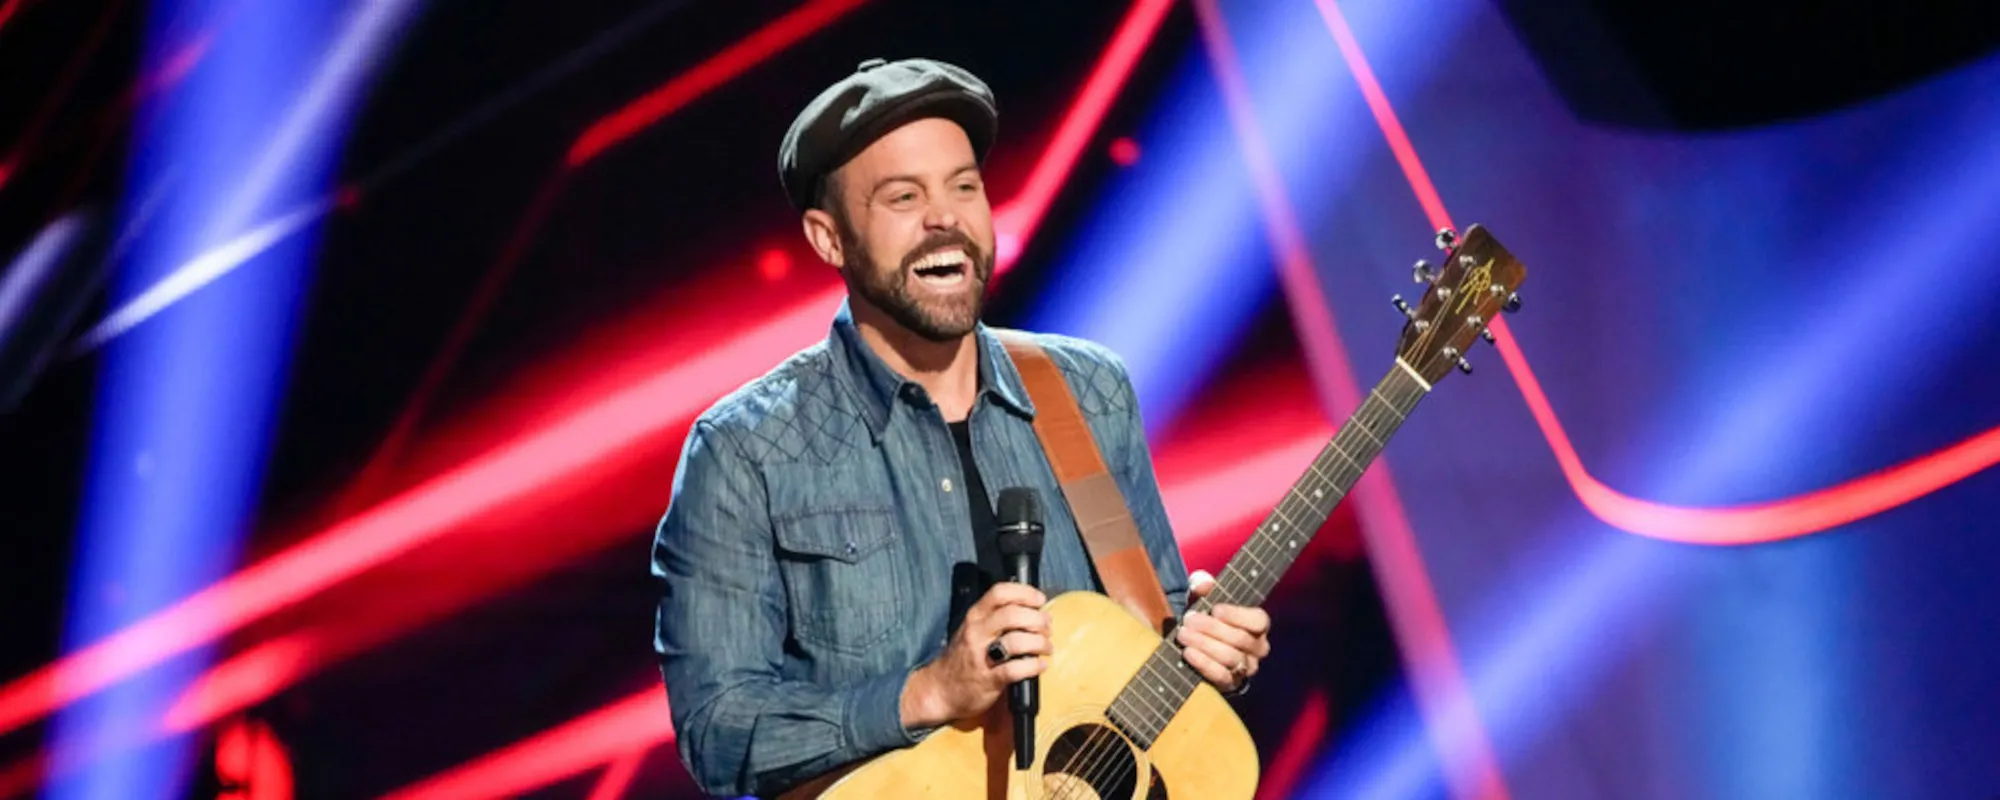 Neil Salsich Covers Hank Williams and Gets the Coveted Four-Chair Turn on ‘The Voice’ Season Premiere